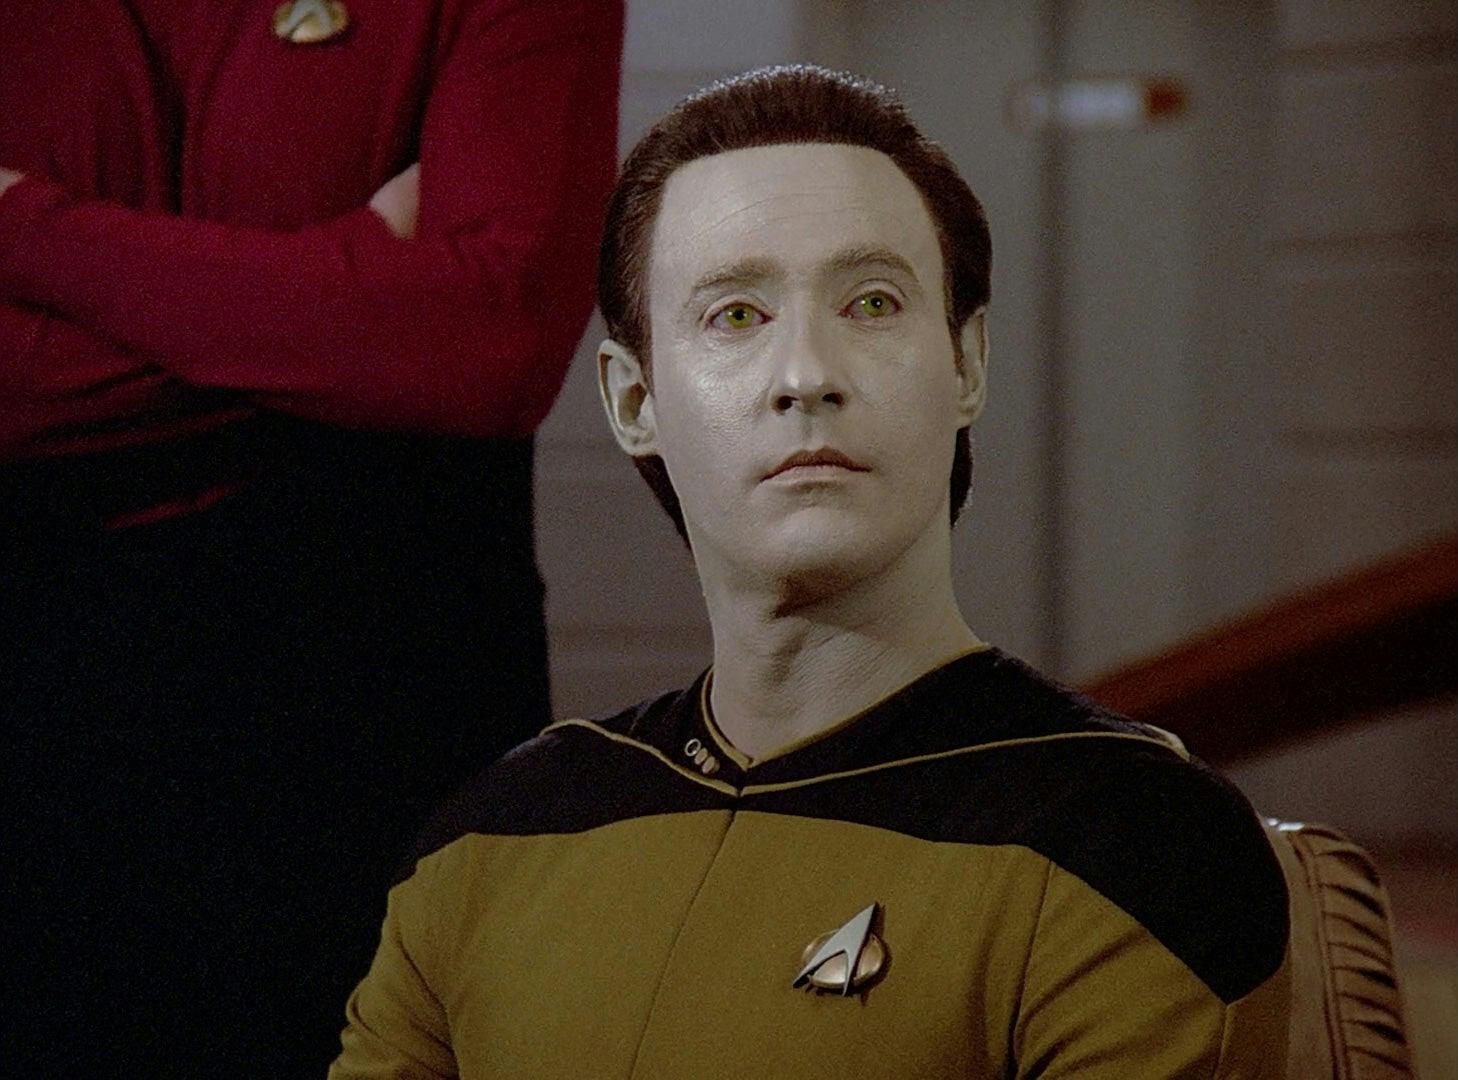 Data sits at his post on the bridge.